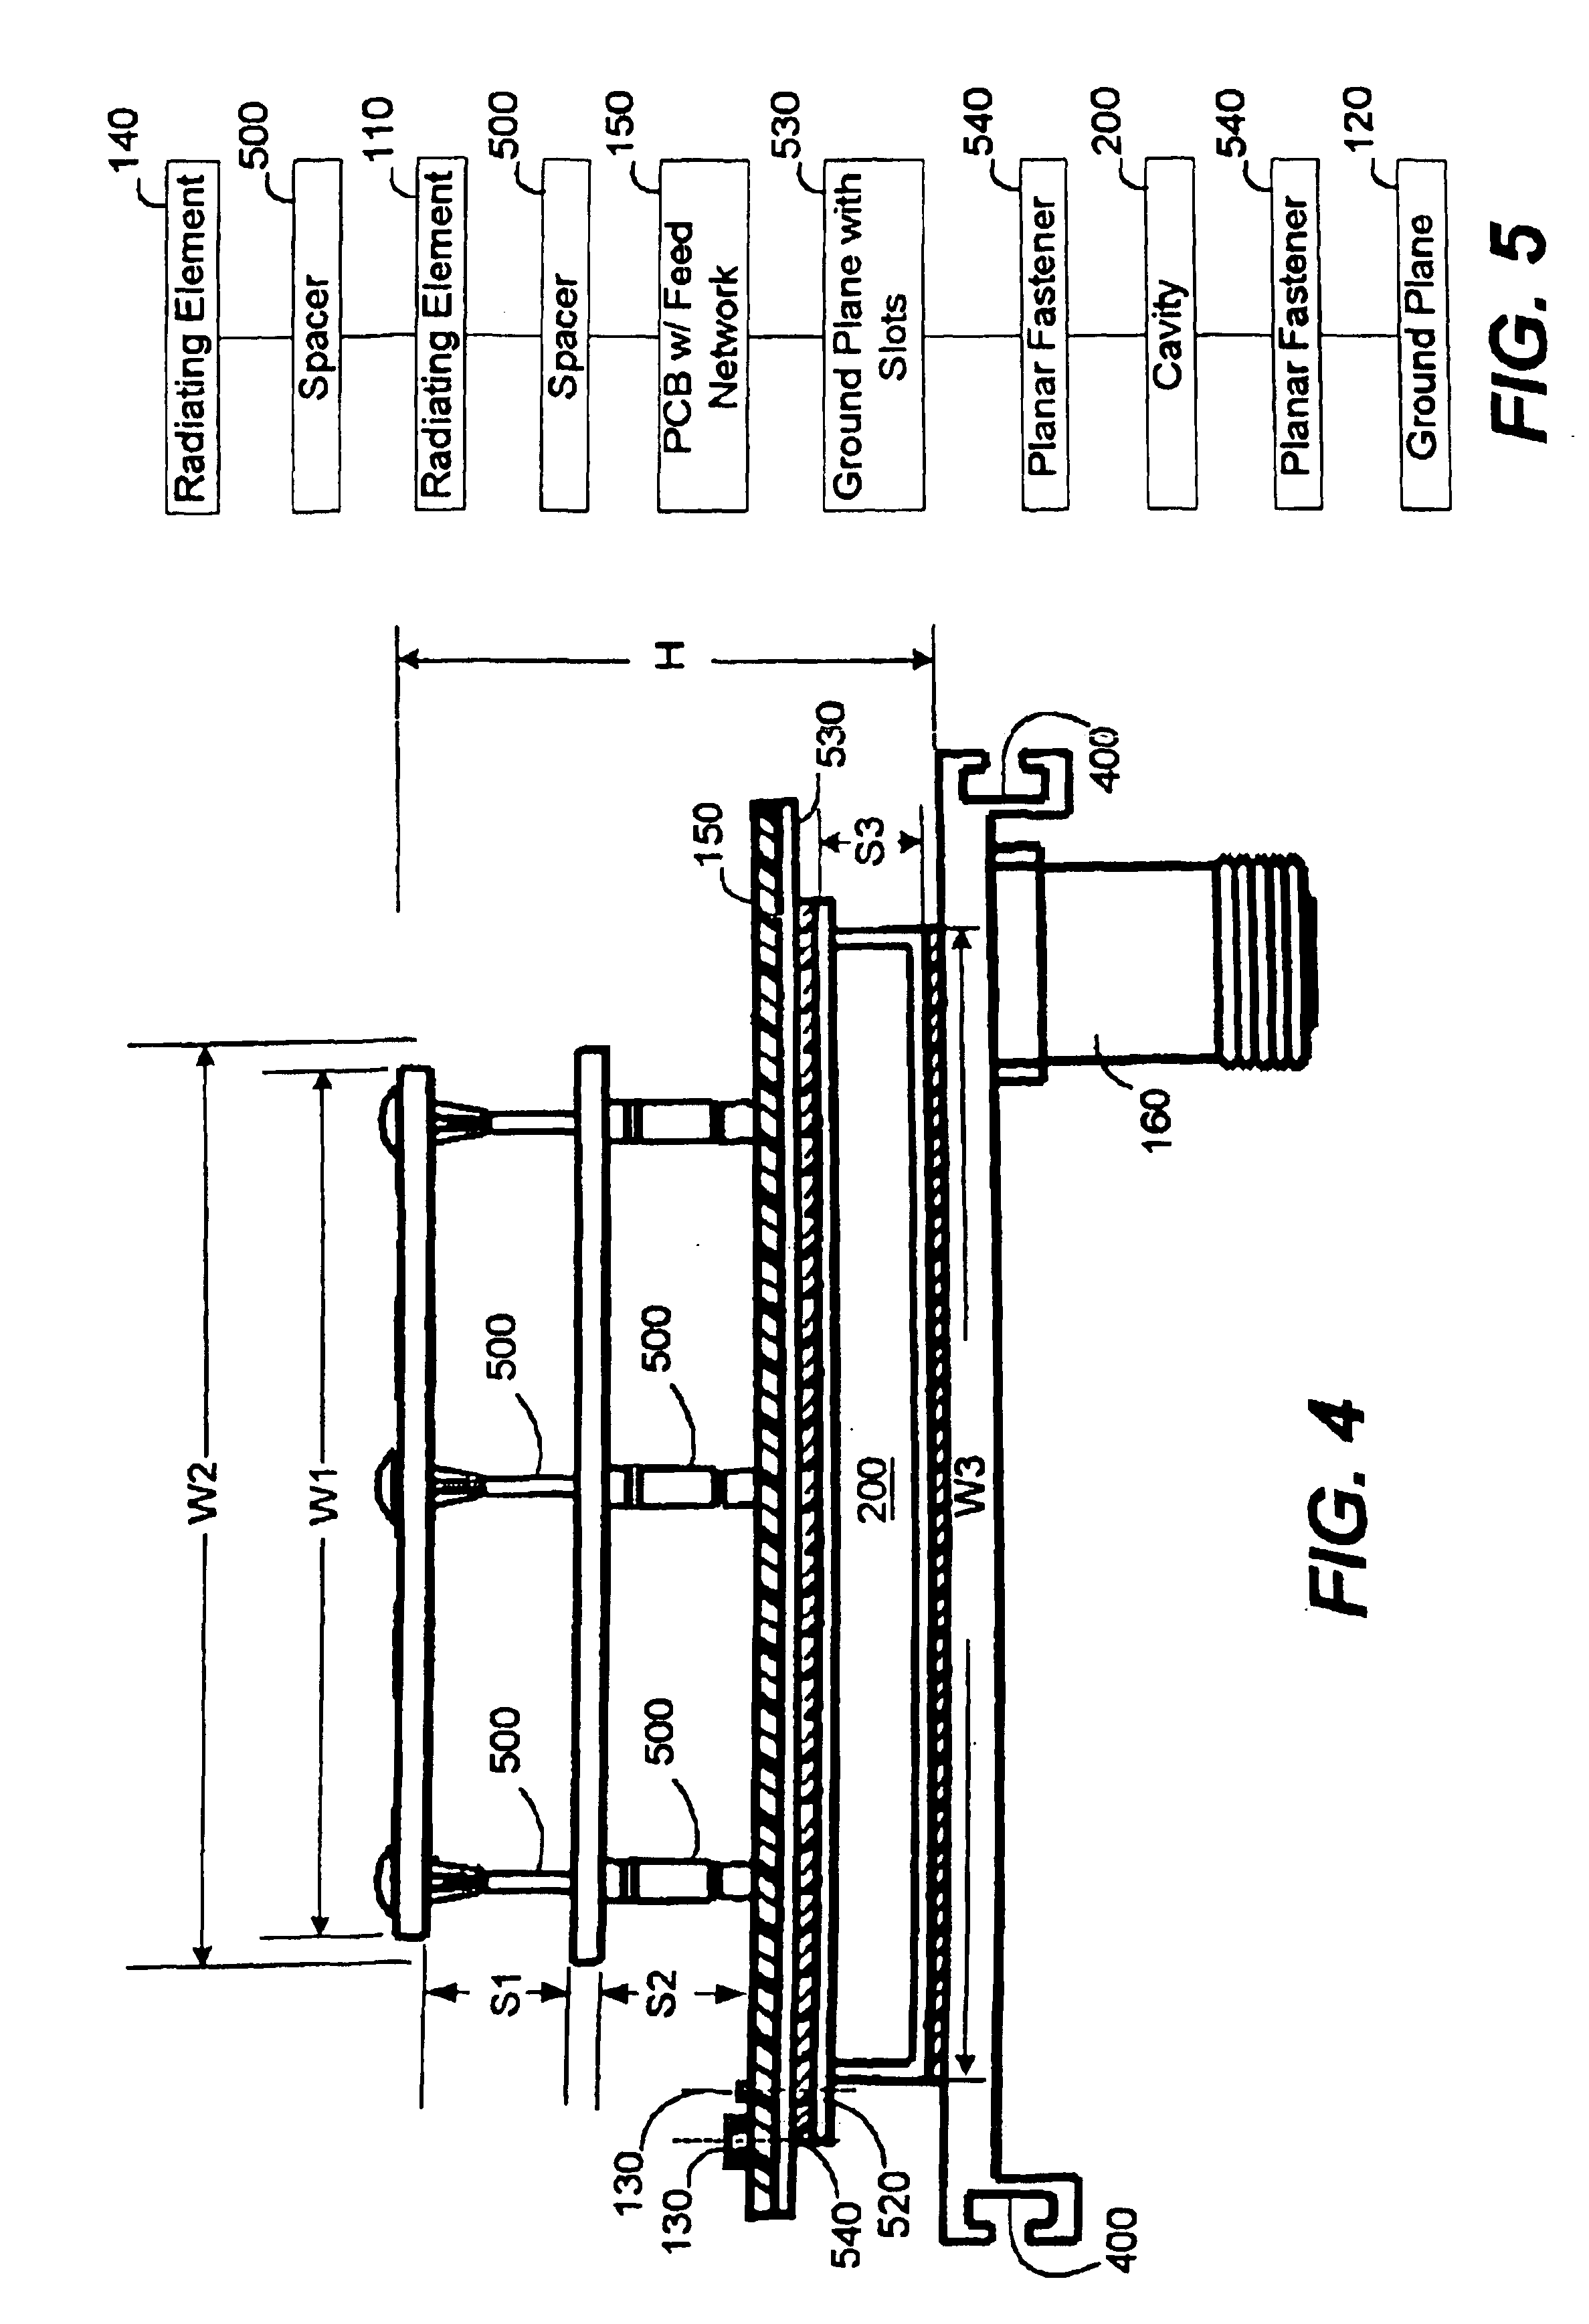 Aperture Coupled Cavity Backed Patch Antenna